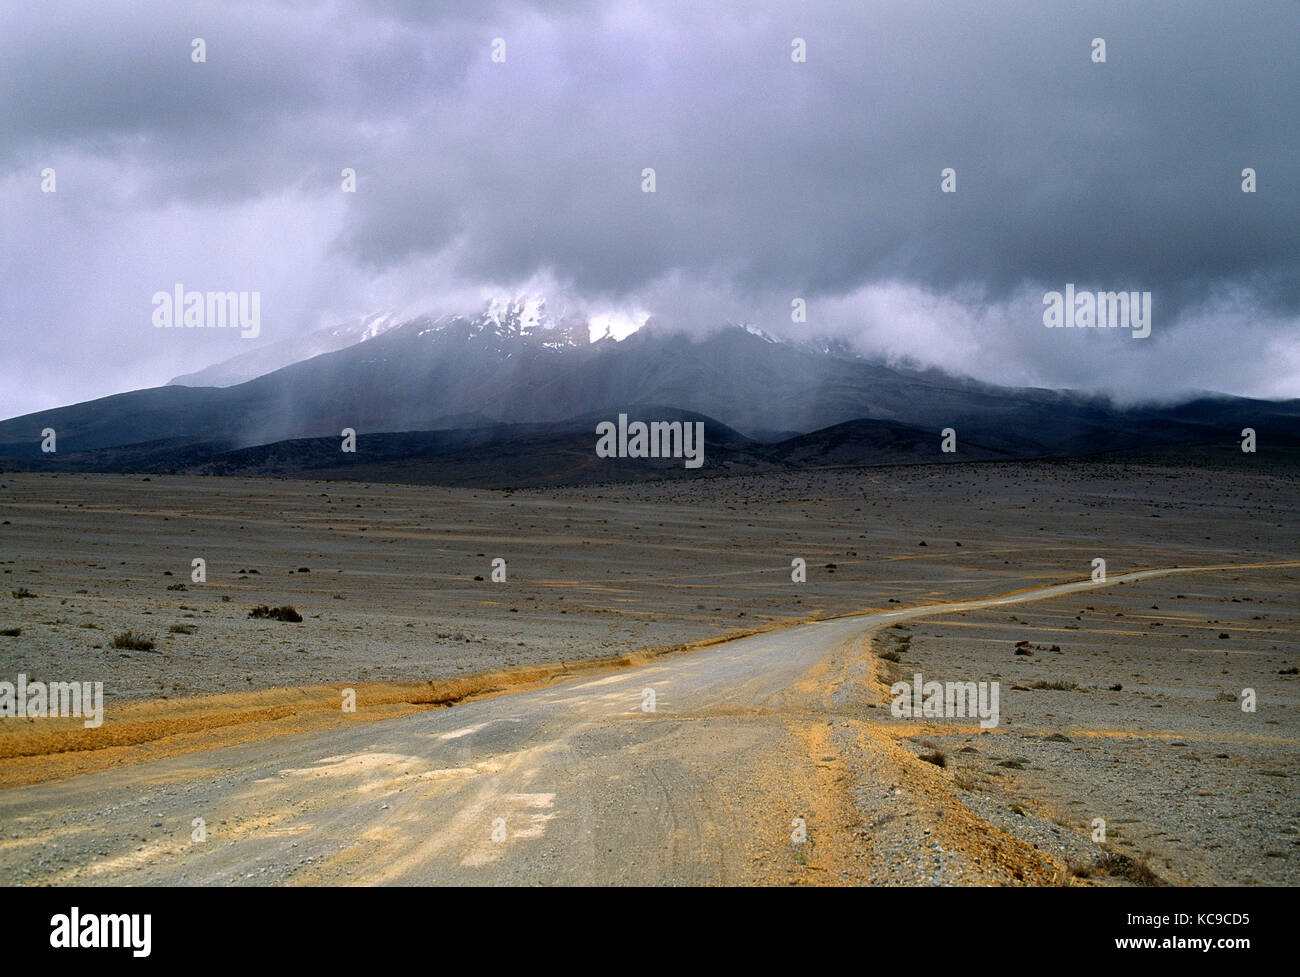 South America. Ecuador. Chimborazo Highlands. Dirt road to mountain shrouded in low cloud. Stock Photo